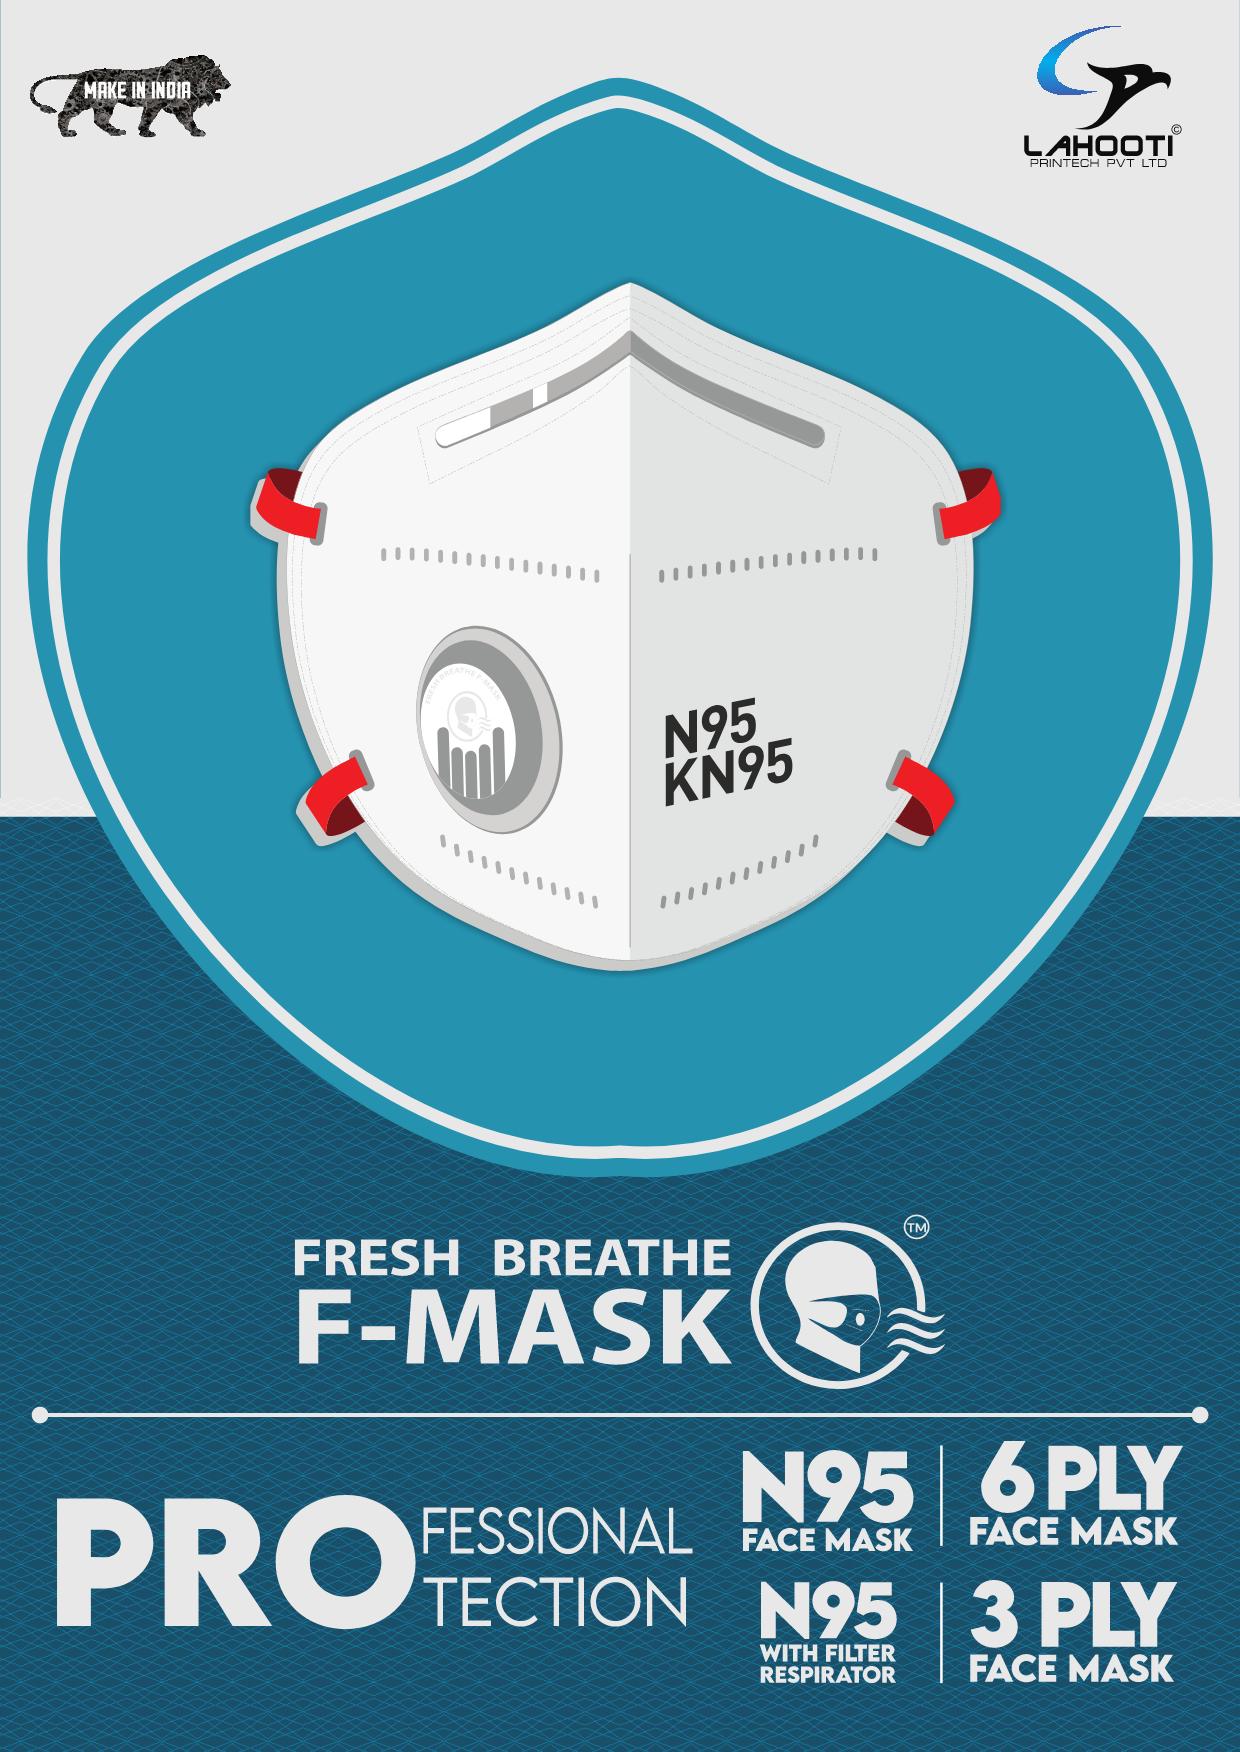 KN95 Mask, Surgical Mask and Face-Mask in Delhi, India